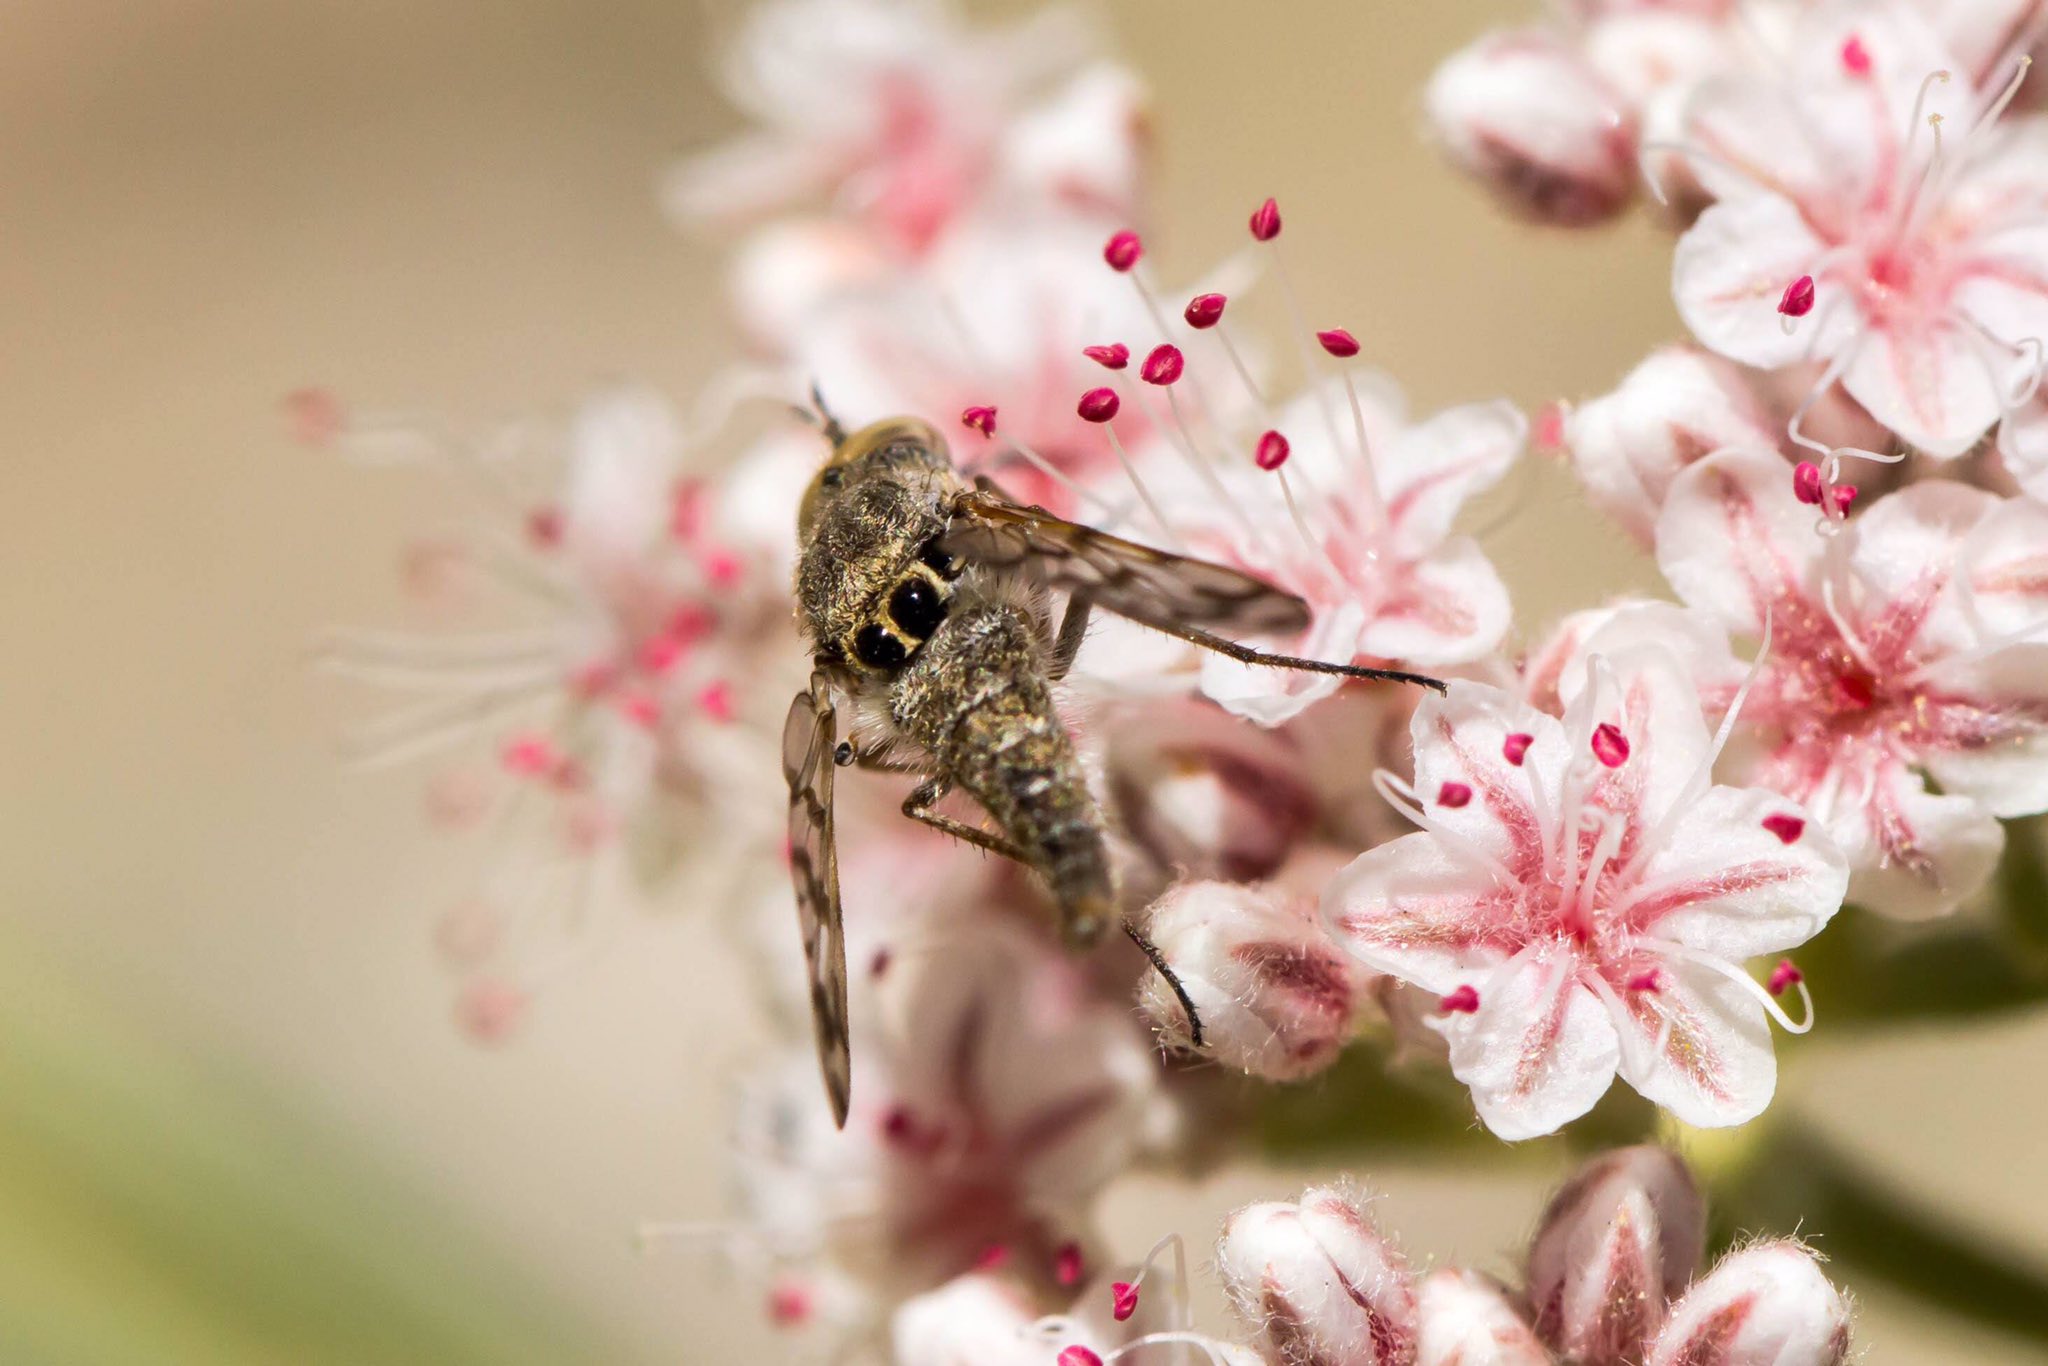 Jumping spider-mimicking fly on pink blossoms